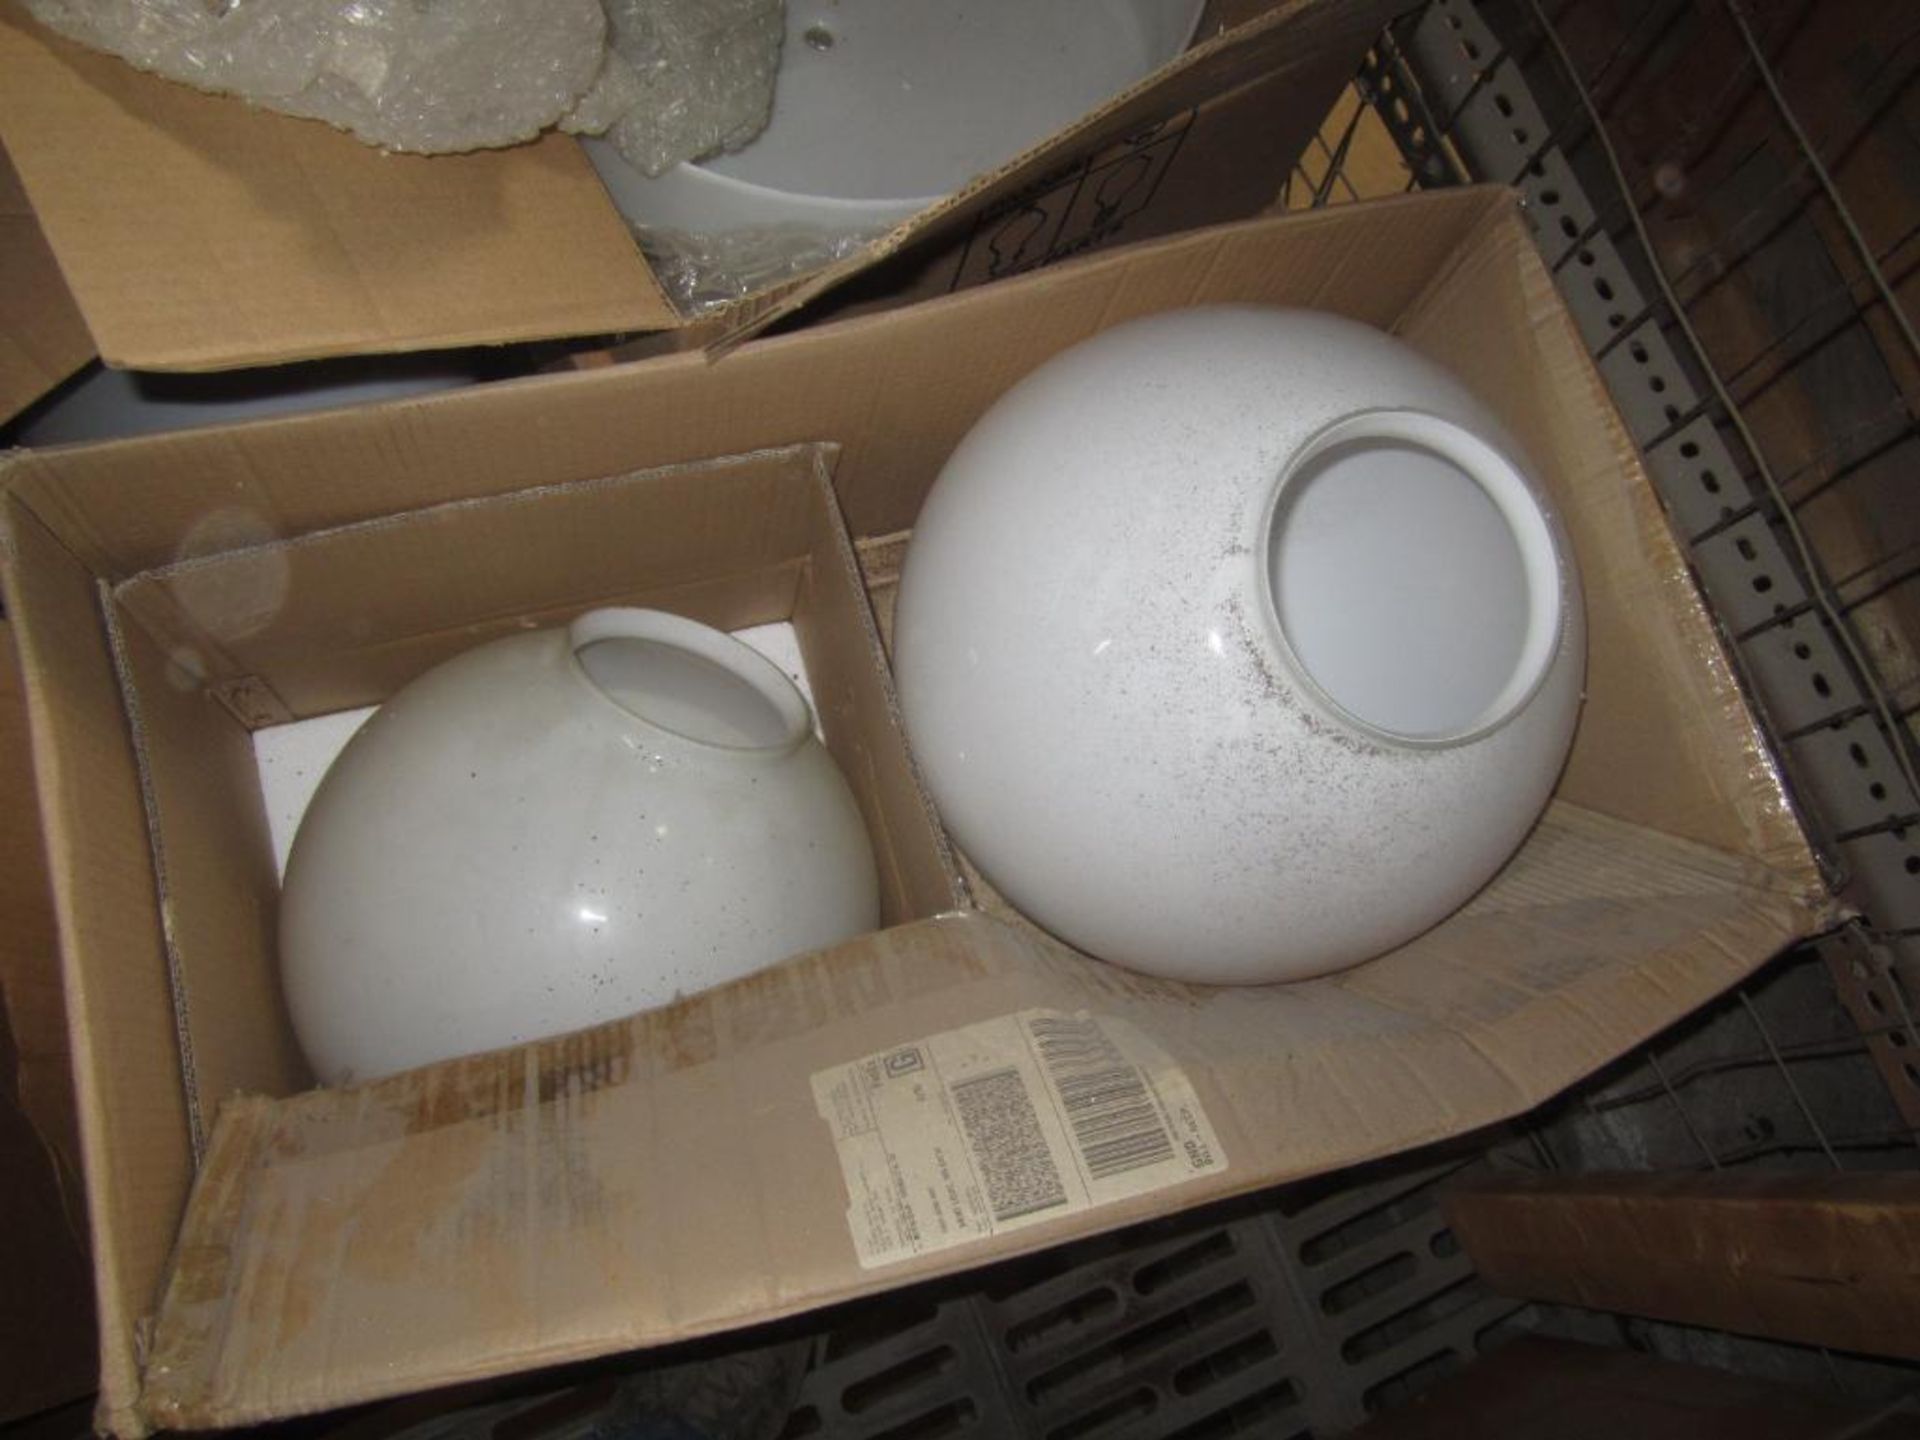 Commercial glass light globes - Image 4 of 8